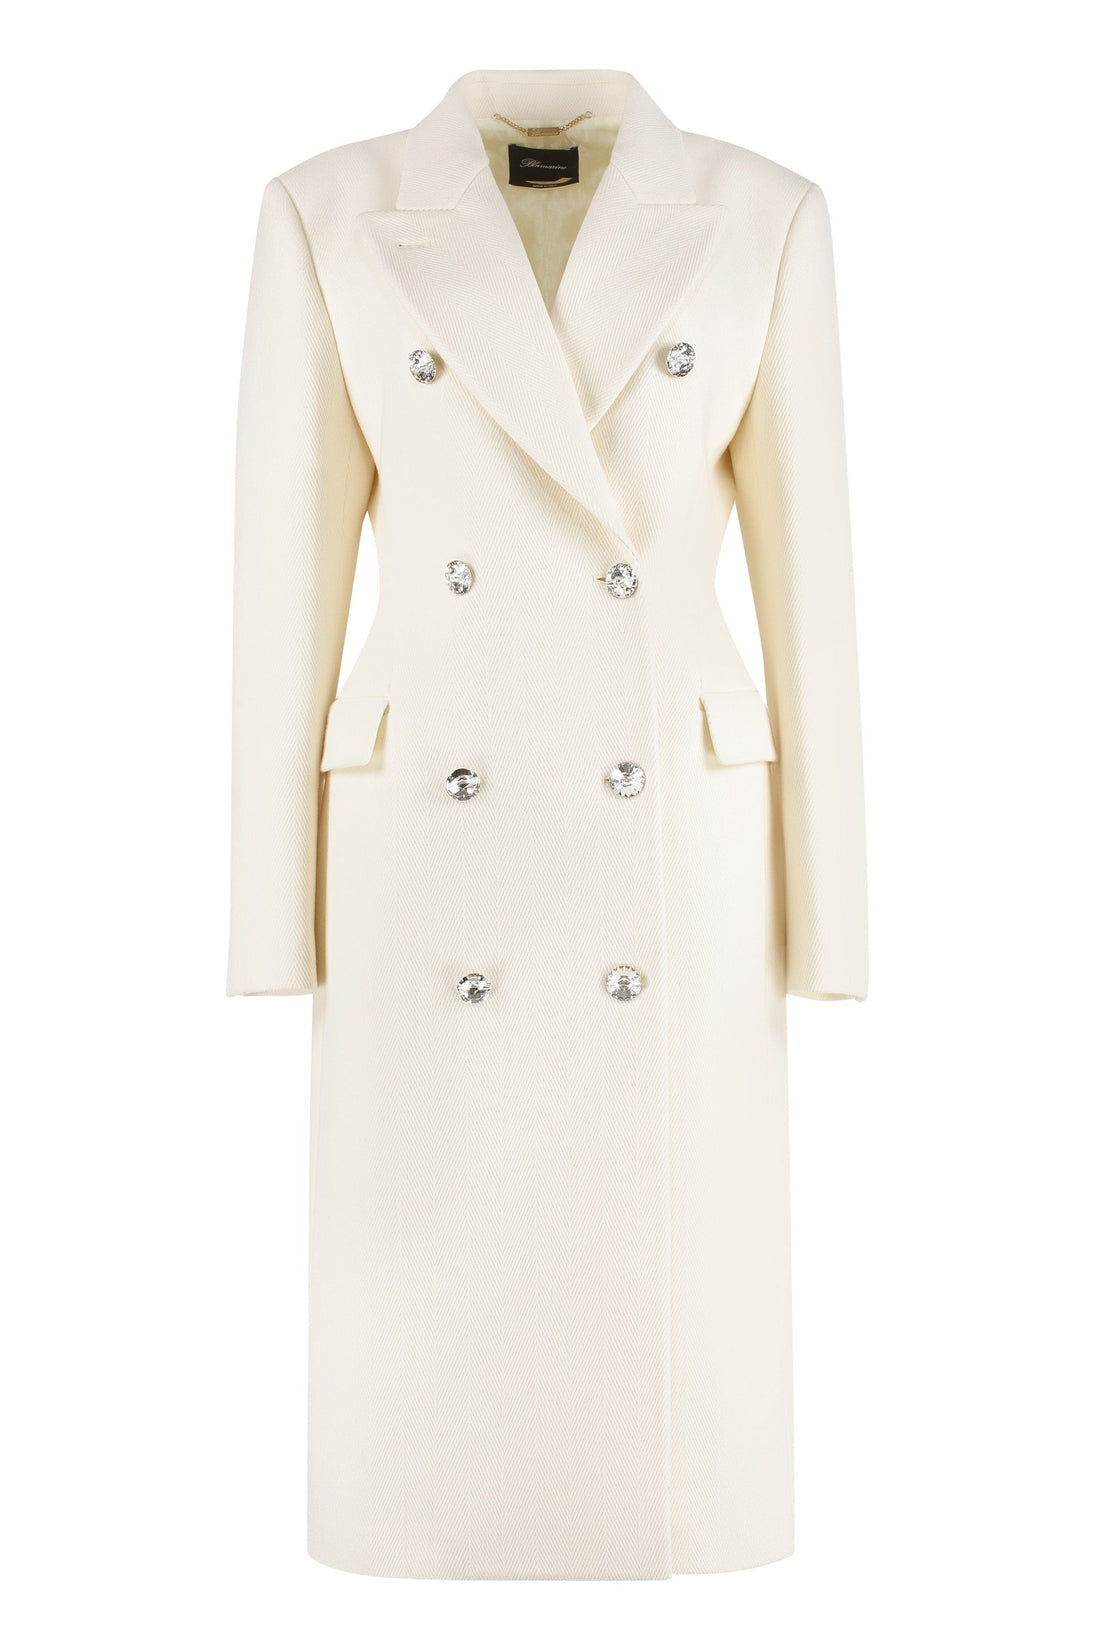 Blumarine-OUTLET-SALE-Wool blend double-breasted coat-ARCHIVIST